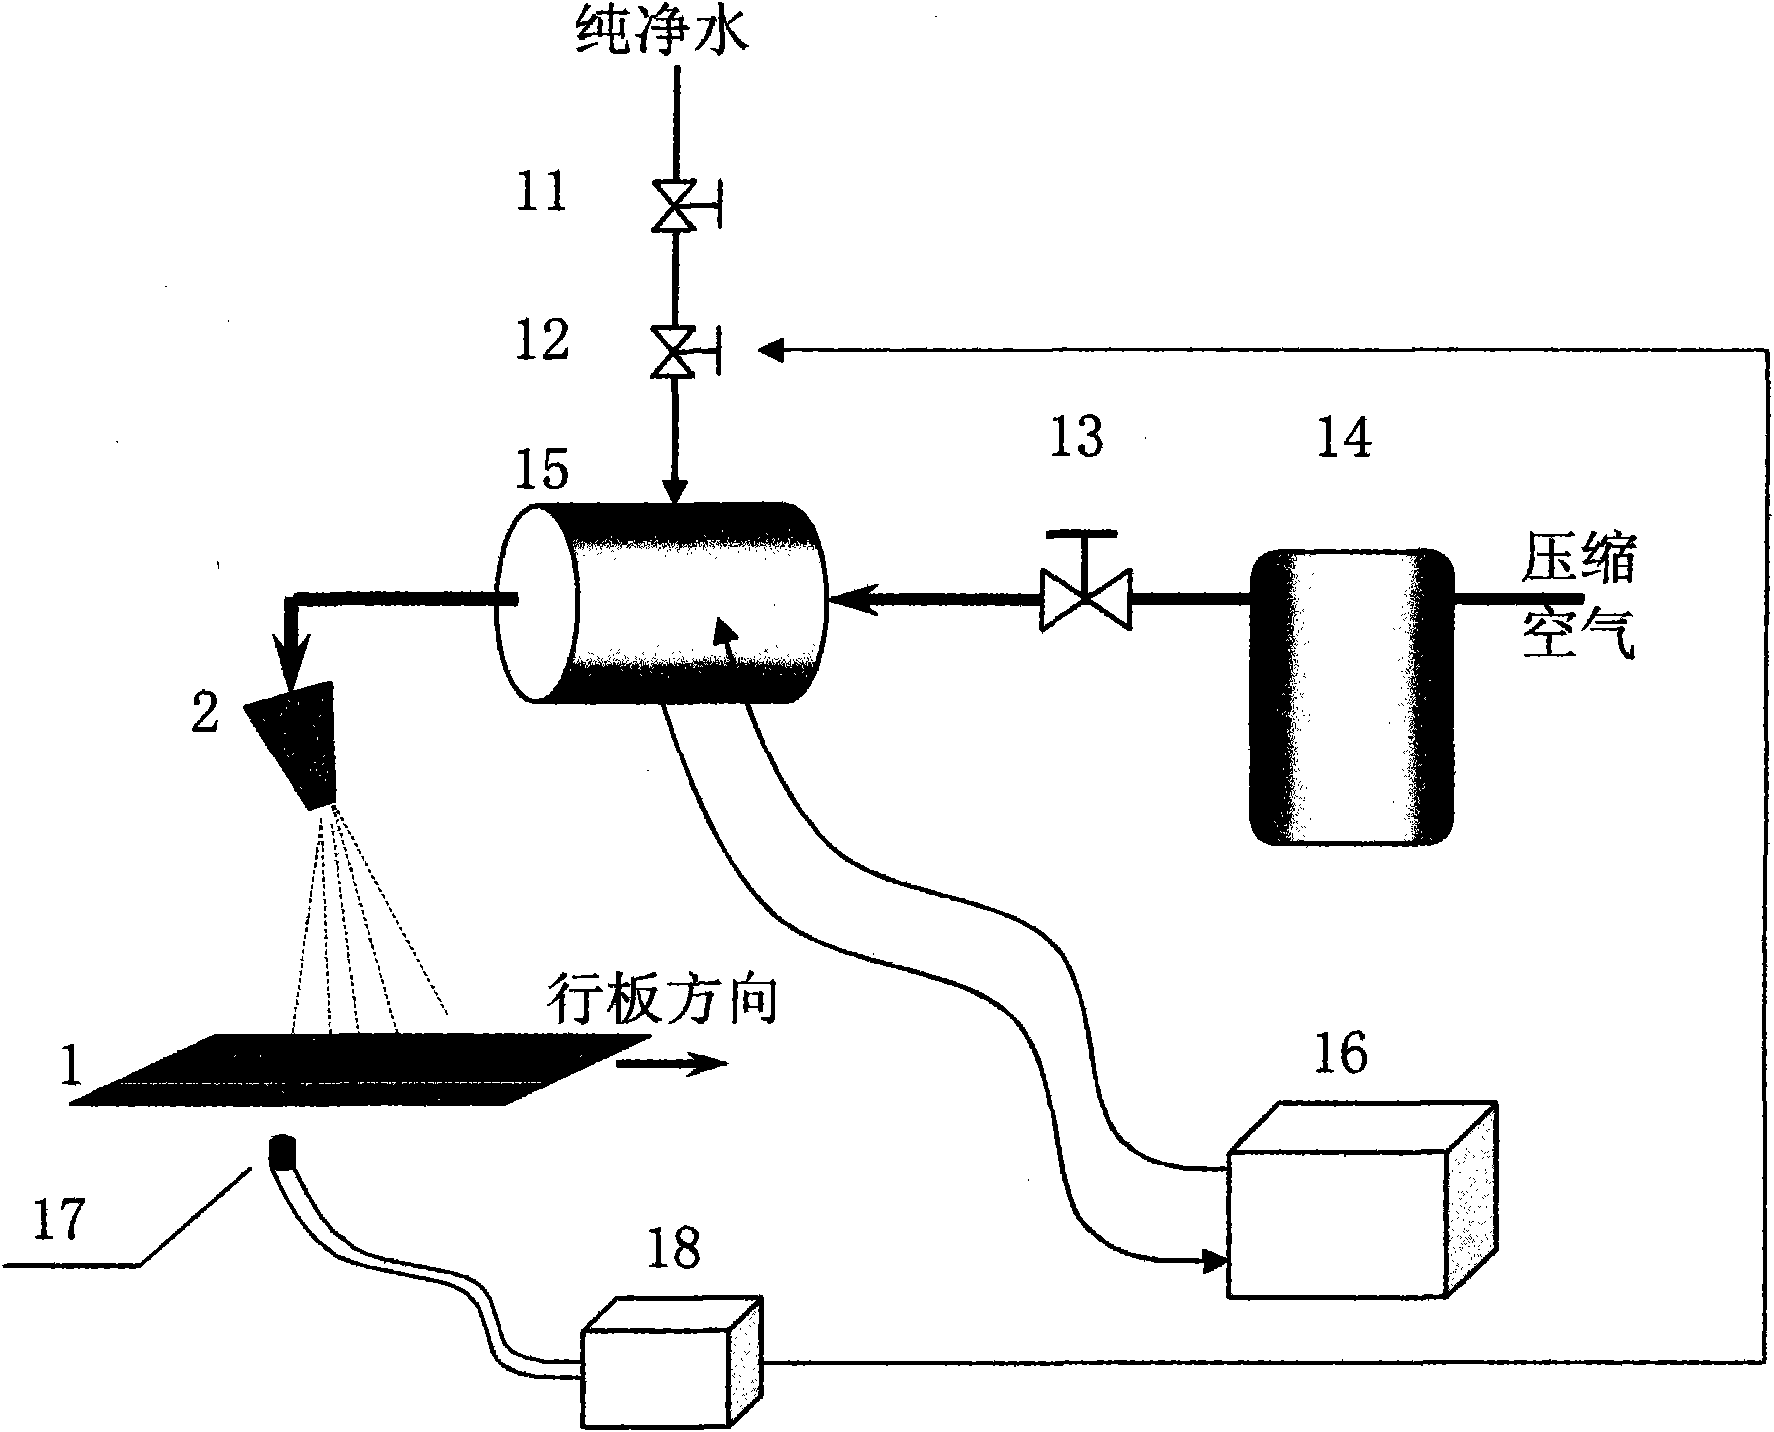 Circuit board wet-lamination method and device